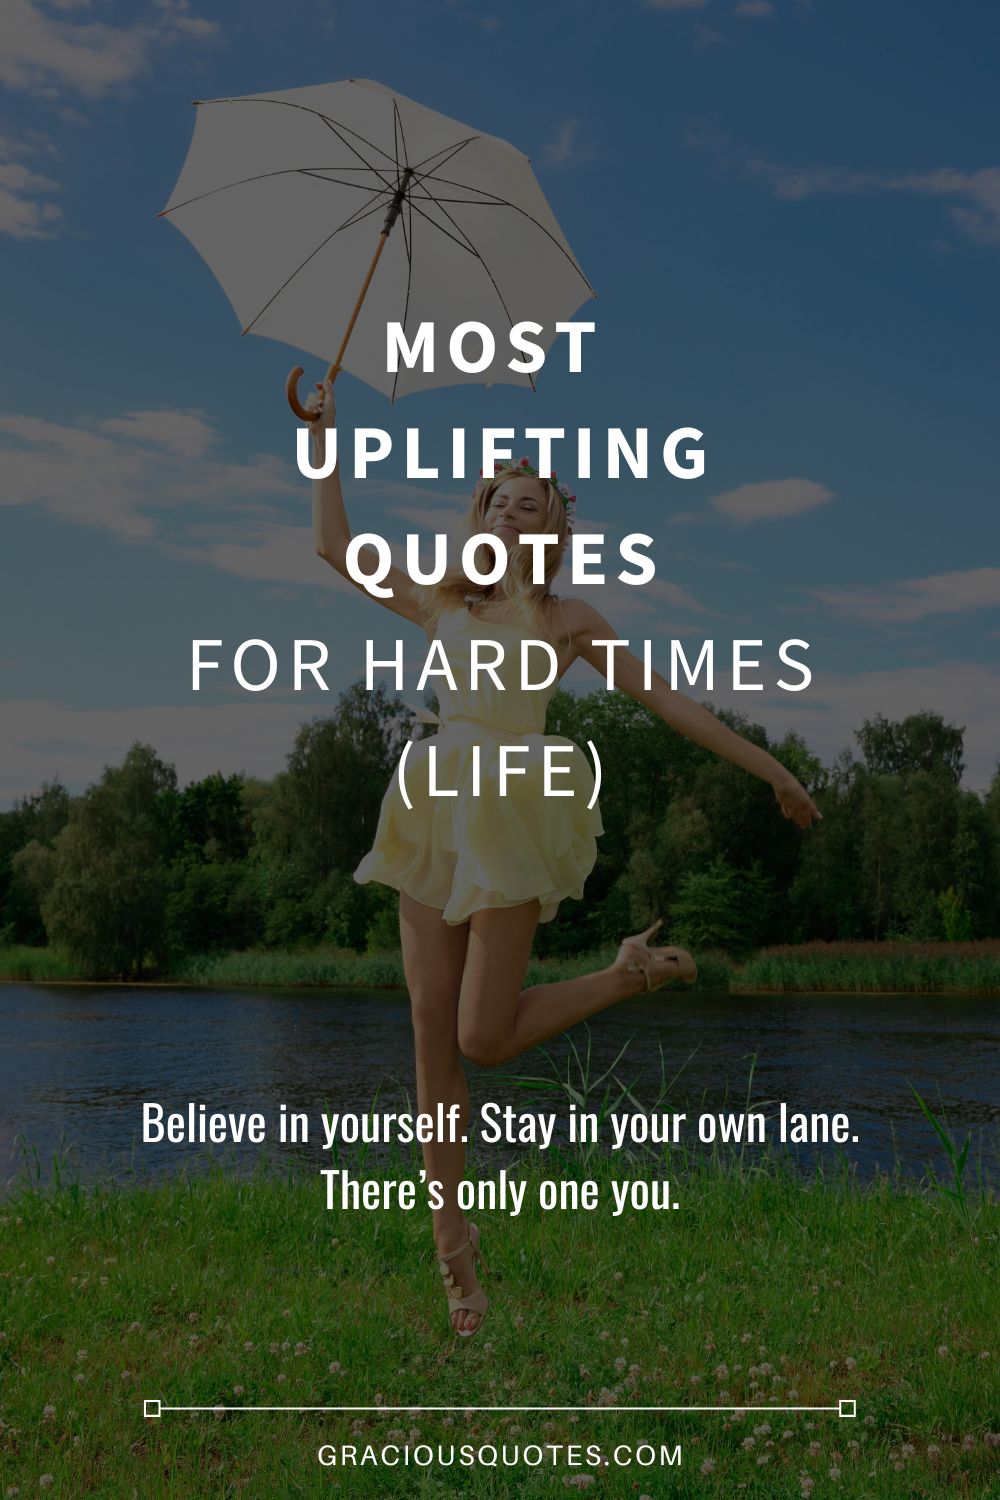 Most Uplifting Quotes for Hard Times (LIFE) - Gracious Quotes